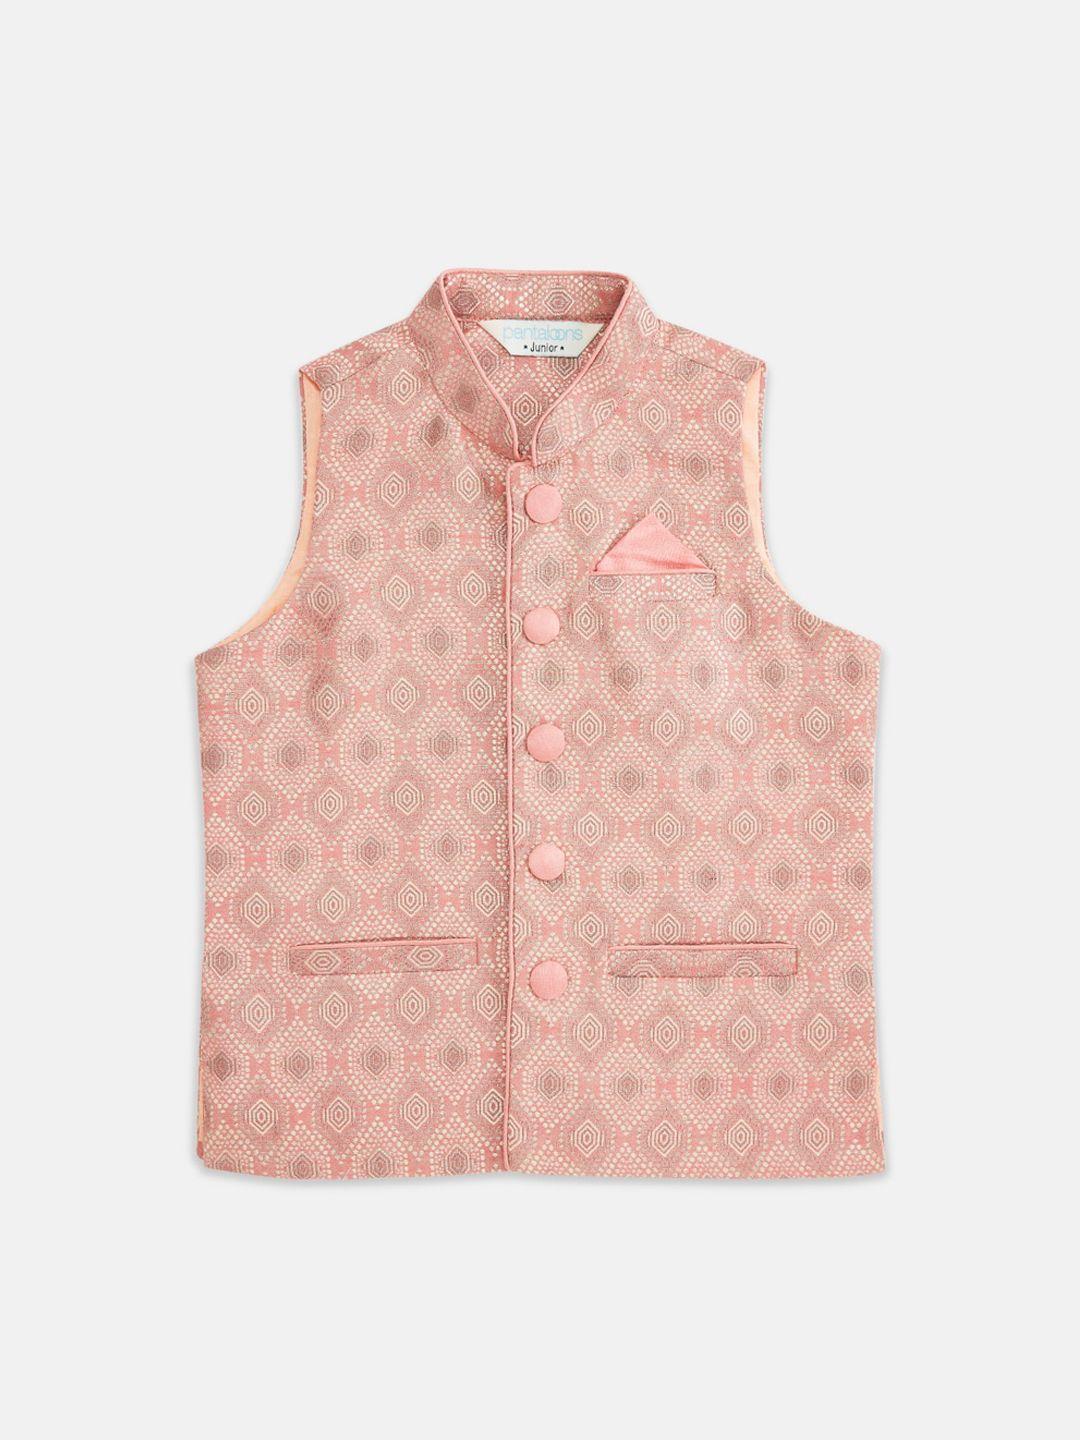 indus-route-by-pantaloons-boys-pink-&-off-white-woven-design-waistcoat